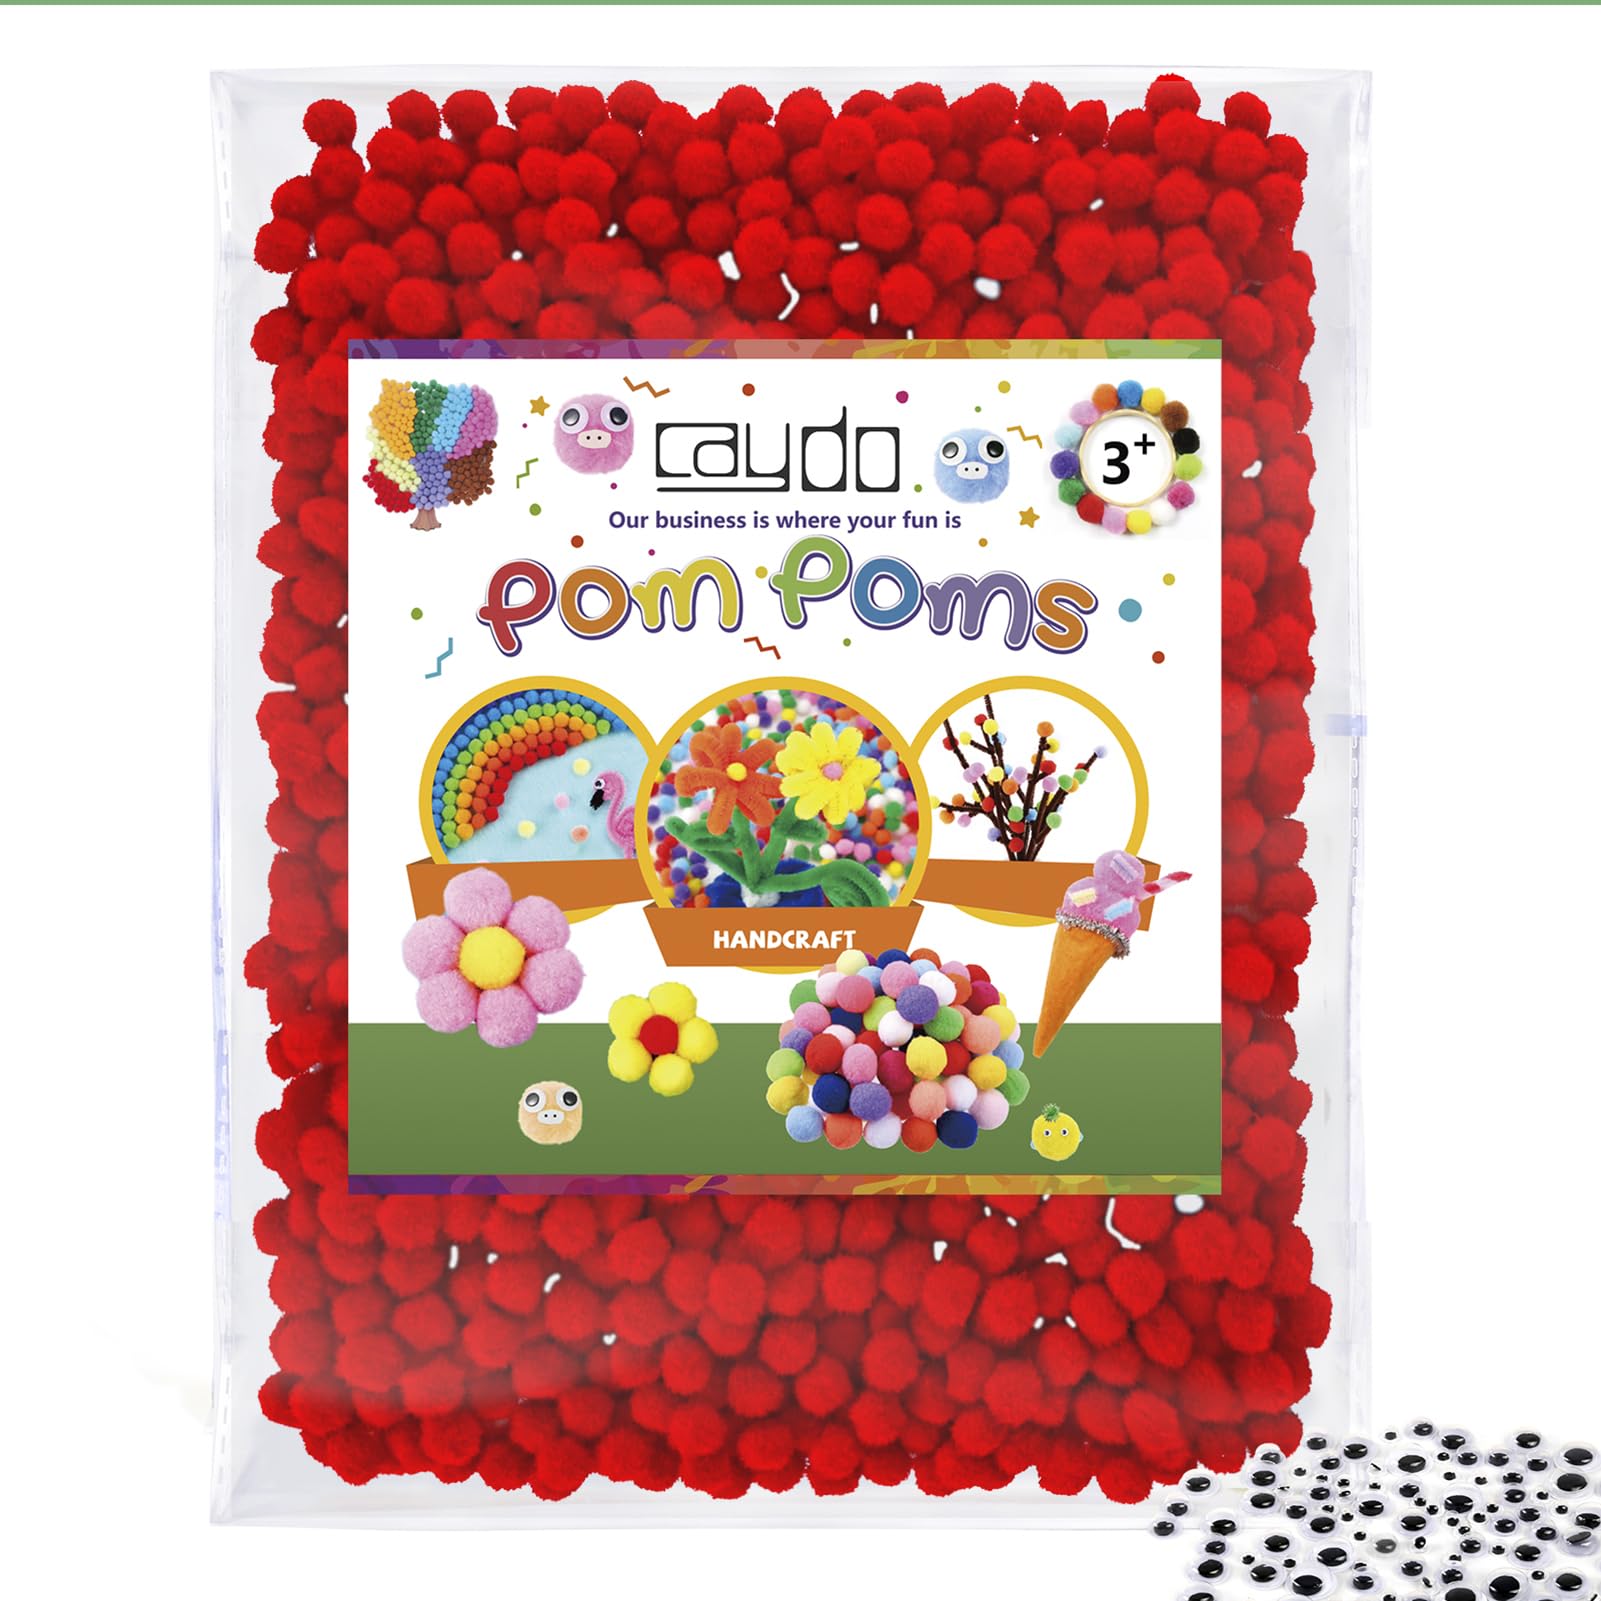 Caydo 500Pcs Red Pom Poms, 1Cm Small Pom Poms Balls For Kids Diy Art  Creative Crafts Projects And Decorations